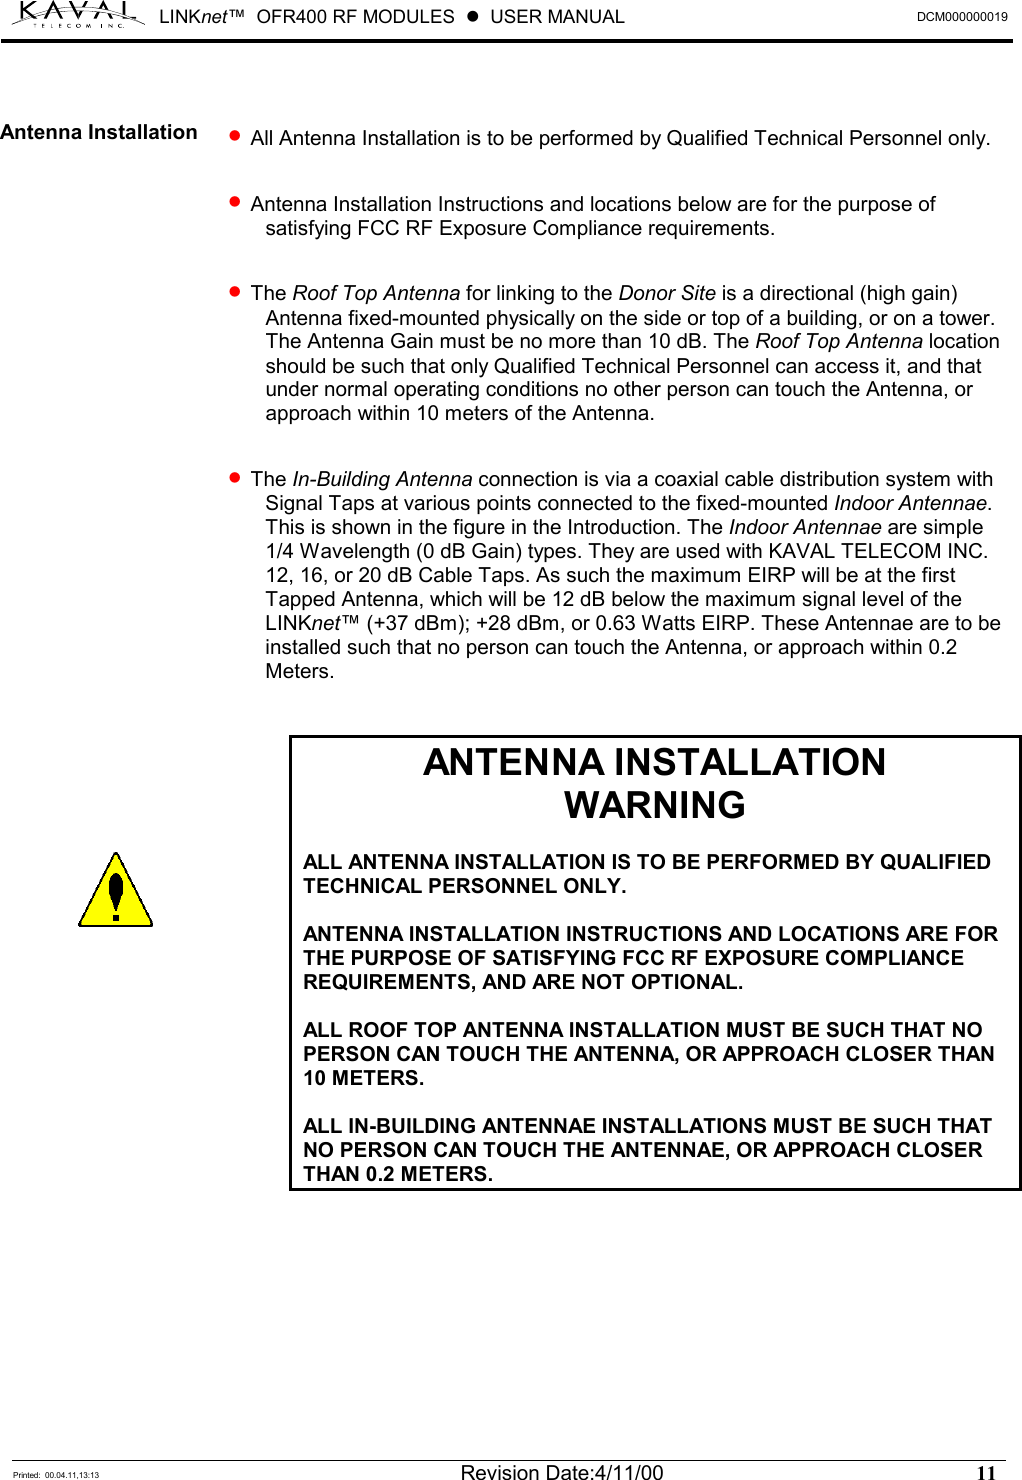 LINKnet™  OFR400 RF MODULES  !  USER MANUAL  DCM000000019   Printed:  00.04.11,13:13  Revision Date:4/11/00   11    •  All Antenna Installation is to be performed by Qualified Technical Personnel only.  •  Antenna Installation Instructions and locations below are for the purpose of satisfying FCC RF Exposure Compliance requirements.  •  The Roof Top Antenna for linking to the Donor Site is a directional (high gain) Antenna fixed-mounted physically on the side or top of a building, or on a tower. The Antenna Gain must be no more than 10 dB. The Roof Top Antenna location should be such that only Qualified Technical Personnel can access it, and that under normal operating conditions no other person can touch the Antenna, or approach within 10 meters of the Antenna.  •  The In-Building Antenna connection is via a coaxial cable distribution system with Signal Taps at various points connected to the fixed-mounted Indoor Antennae. This is shown in the figure in the Introduction. The Indoor Antennae are simple 1/4 Wavelength (0 dB Gain) types. They are used with KAVAL TELECOM INC. 12, 16, or 20 dB Cable Taps. As such the maximum EIRP will be at the first Tapped Antenna, which will be 12 dB below the maximum signal level of the LINKnet™ (+37 dBm); +28 dBm, or 0.63 Watts EIRP. These Antennae are to be installed such that no person can touch the Antenna, or approach within 0.2 Meters.   ANTENNA INSTALLATION WARNING  ALL ANTENNA INSTALLATION IS TO BE PERFORMED BY QUALIFIED TECHNICAL PERSONNEL ONLY.  ANTENNA INSTALLATION INSTRUCTIONS AND LOCATIONS ARE FOR THE PURPOSE OF SATISFYING FCC RF EXPOSURE COMPLIANCE REQUIREMENTS, AND ARE NOT OPTIONAL.  ALL ROOF TOP ANTENNA INSTALLATION MUST BE SUCH THAT NO PERSON CAN TOUCH THE ANTENNA, OR APPROACH CLOSER THAN 10 METERS.   ALL IN-BUILDING ANTENNAE INSTALLATIONS MUST BE SUCH THAT NO PERSON CAN TOUCH THE ANTENNAE, OR APPROACH CLOSER THAN 0.2 METERS.   Antenna Installation  